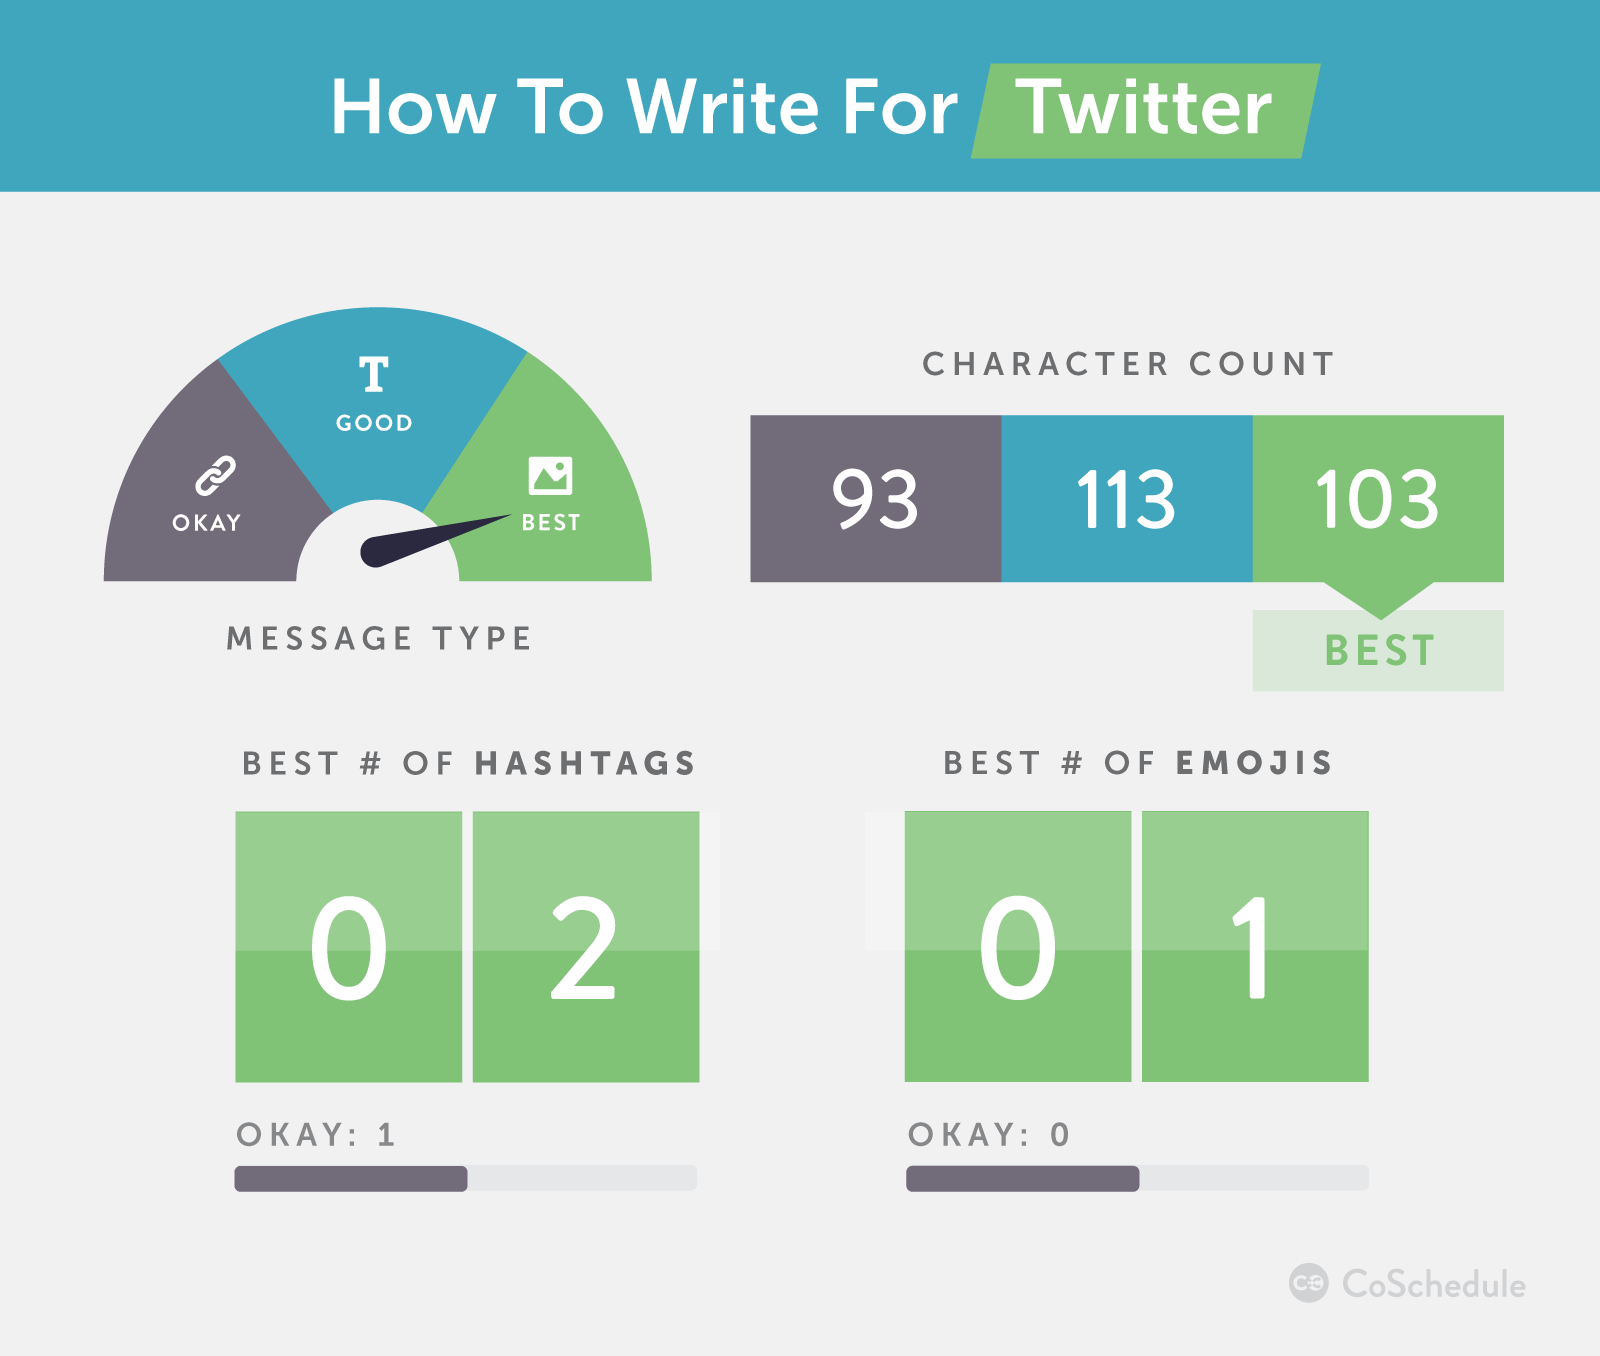 How to write for Twitter